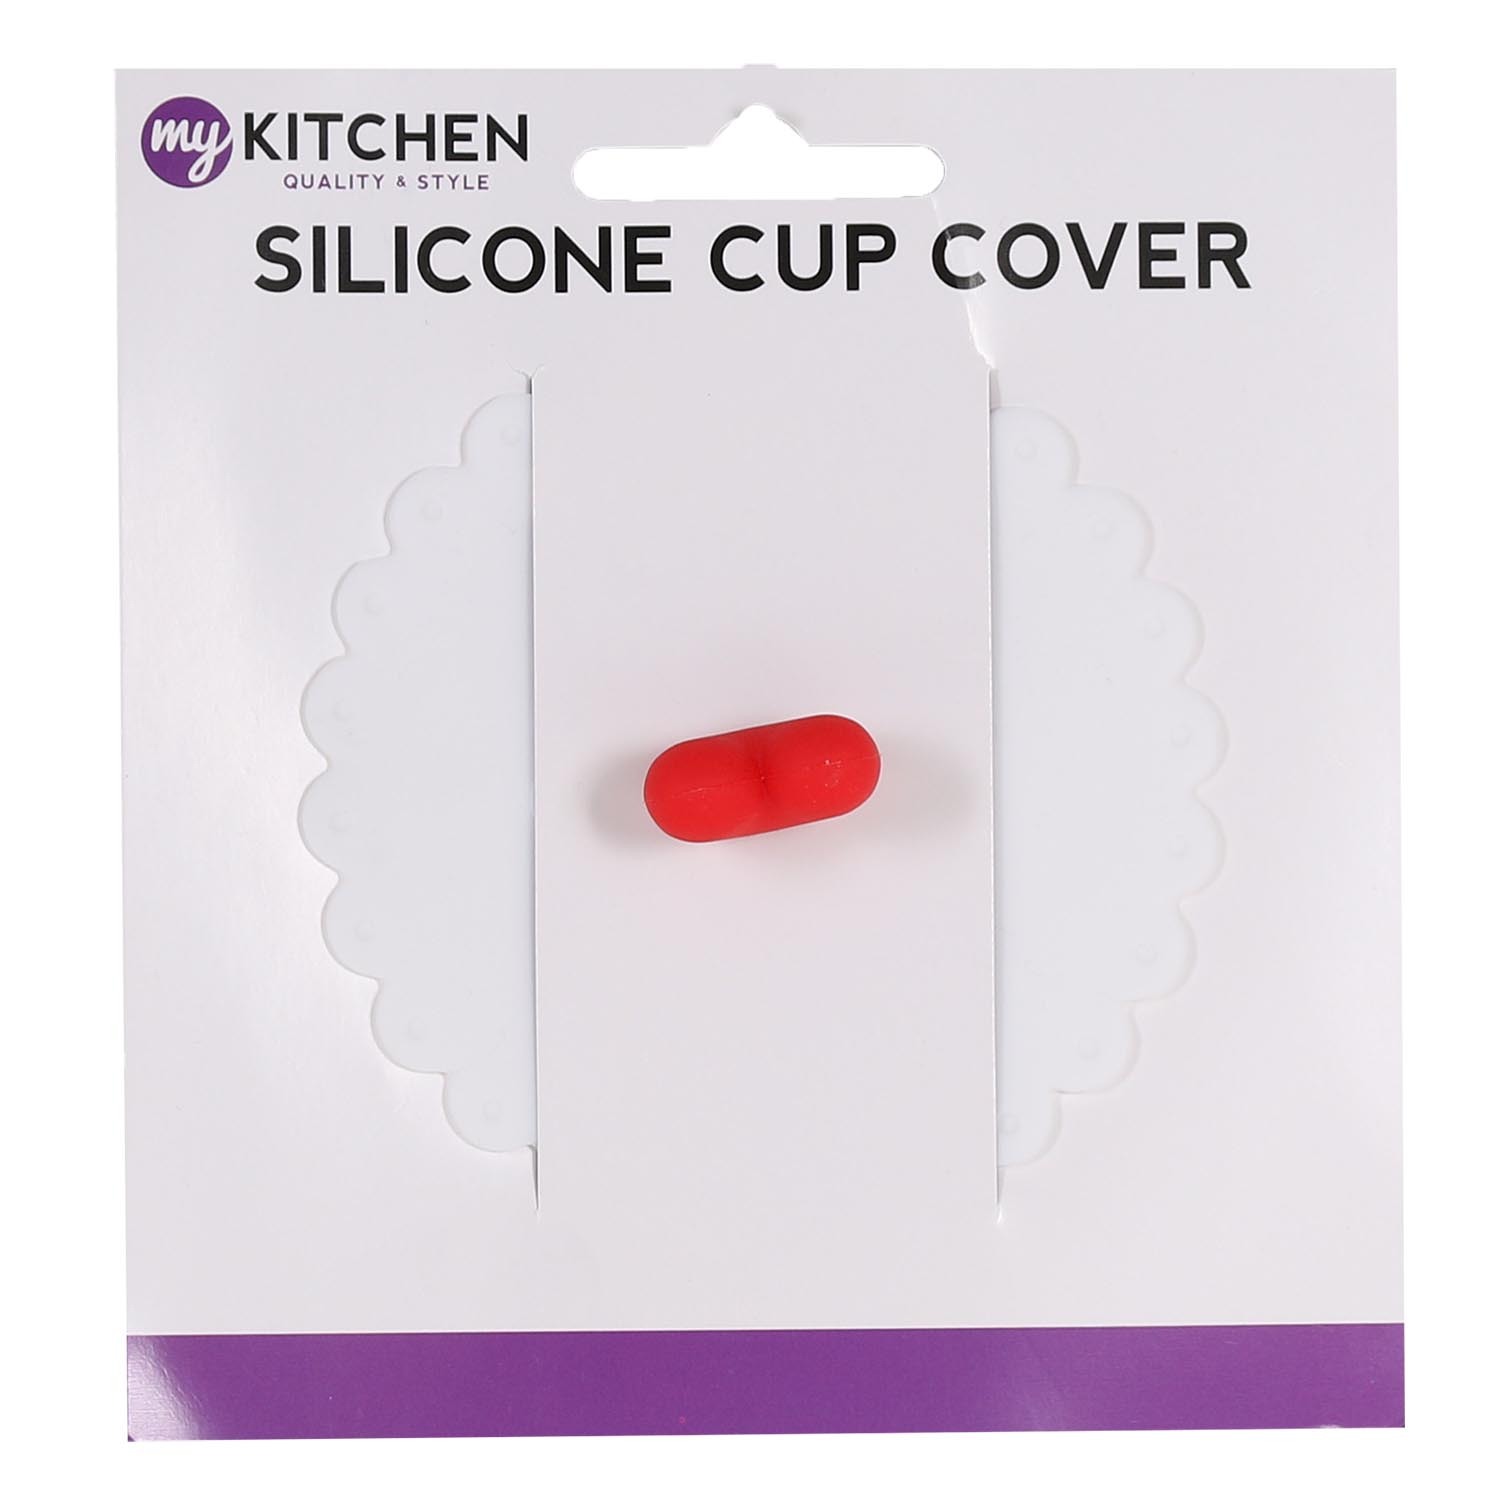 Silicone Cup Cover Image